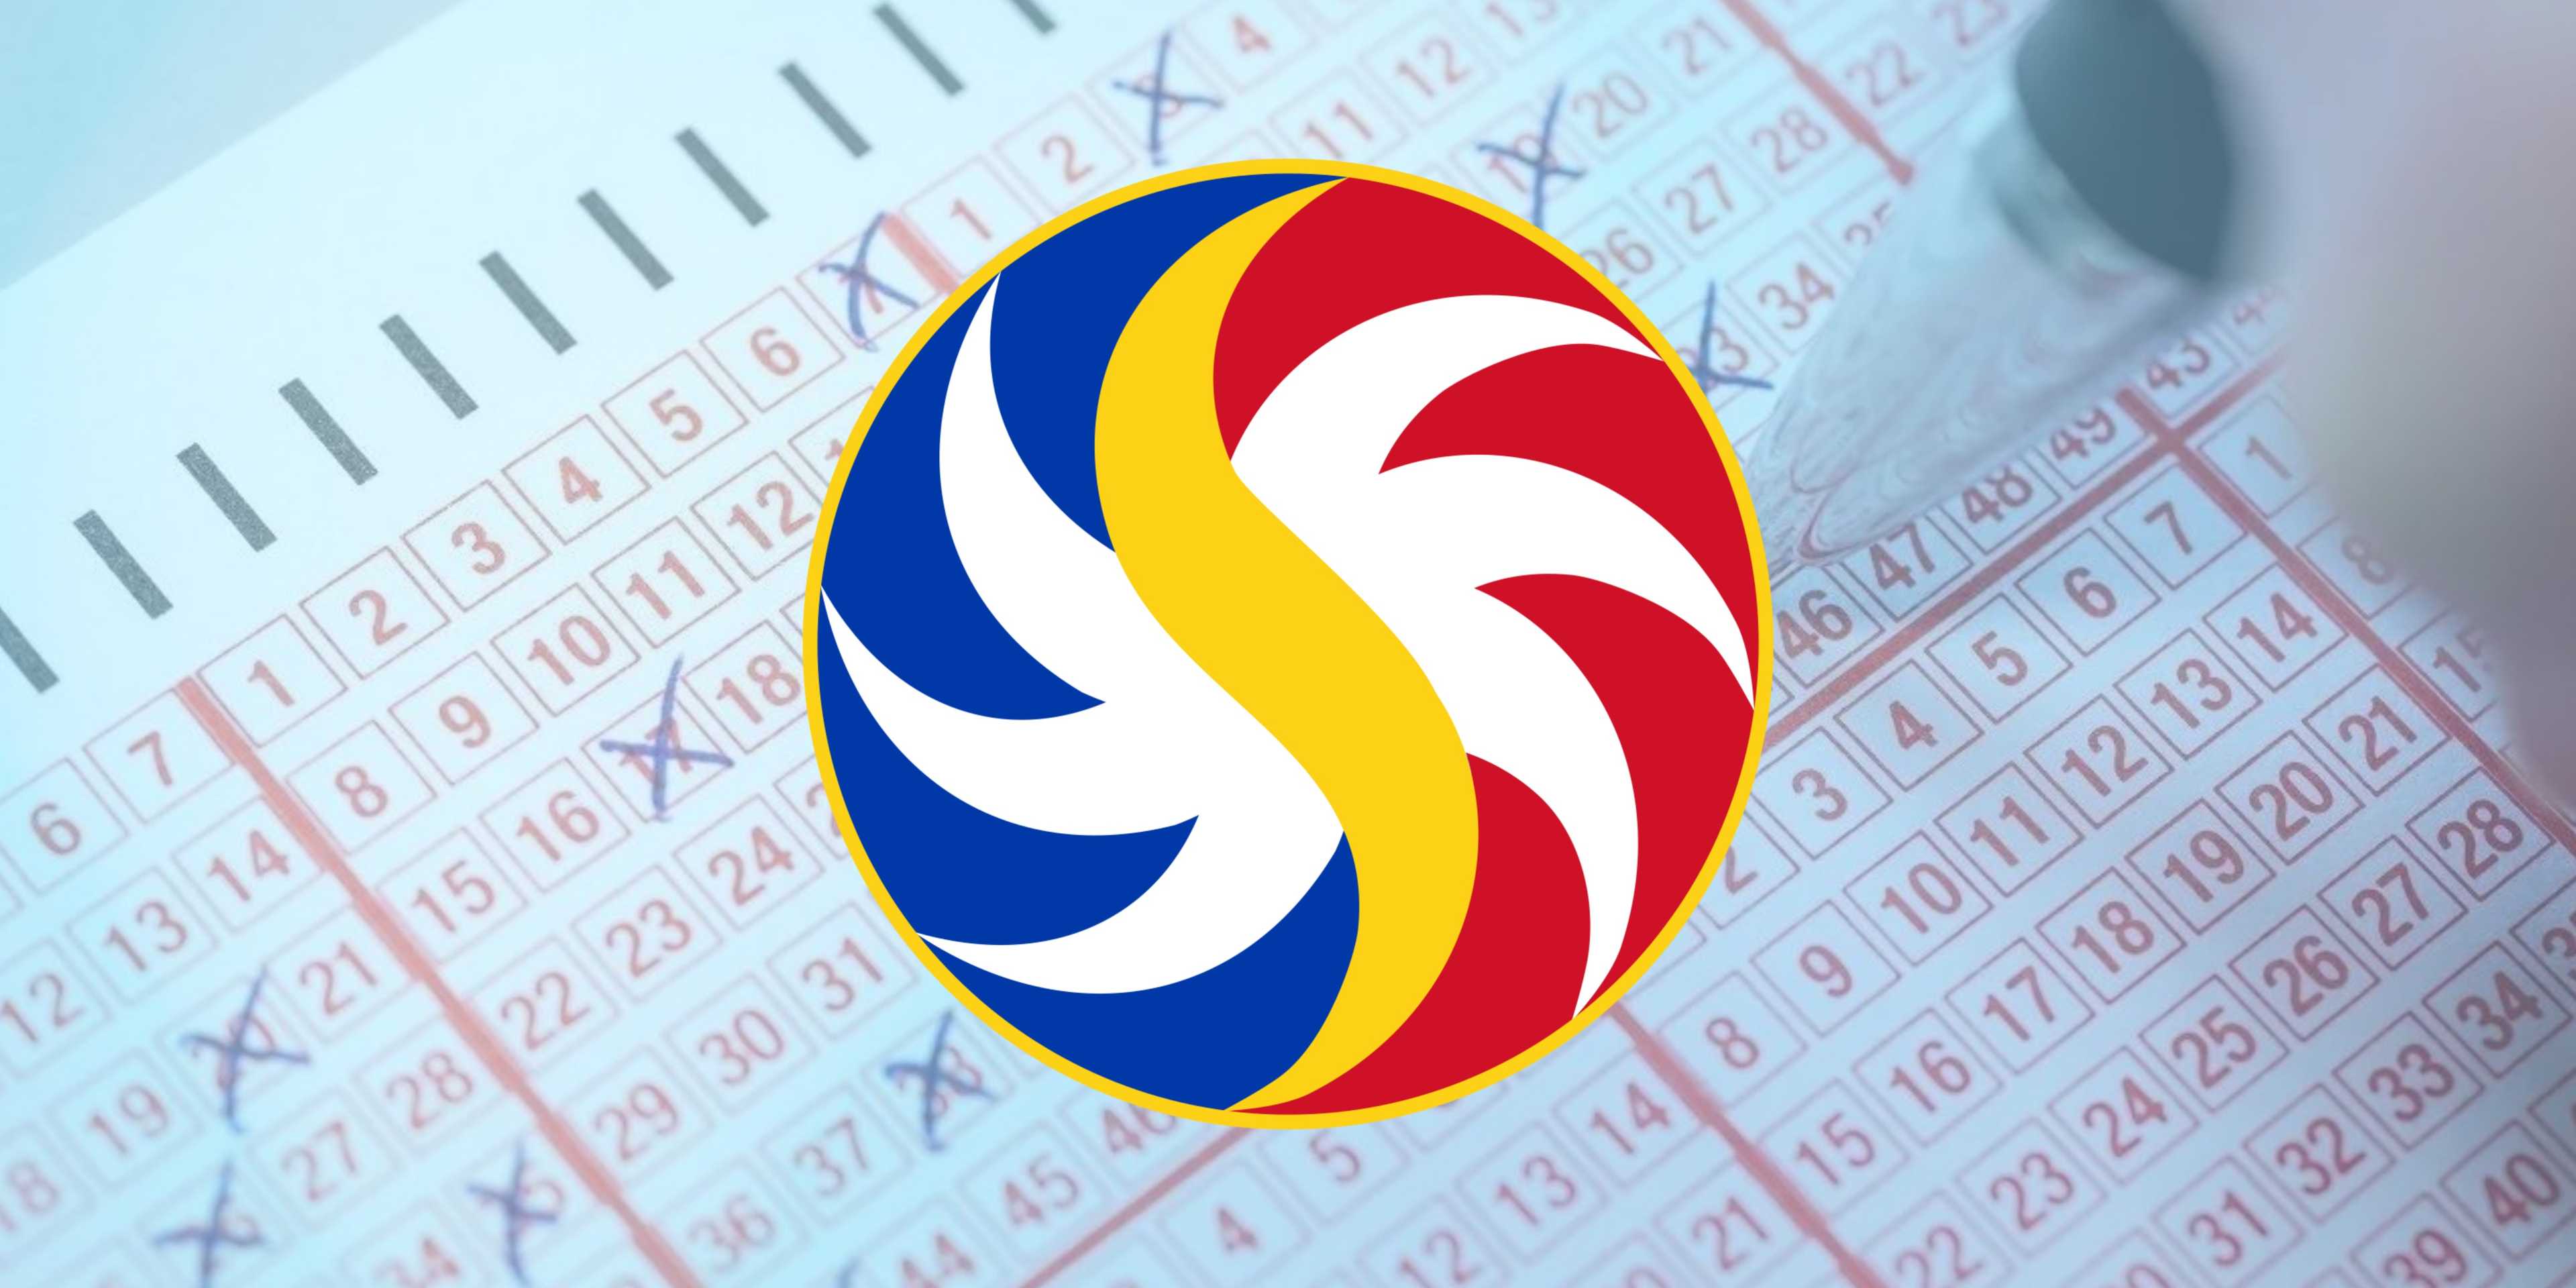 PCSO Lotto Draw Results on Wednesday, March 13